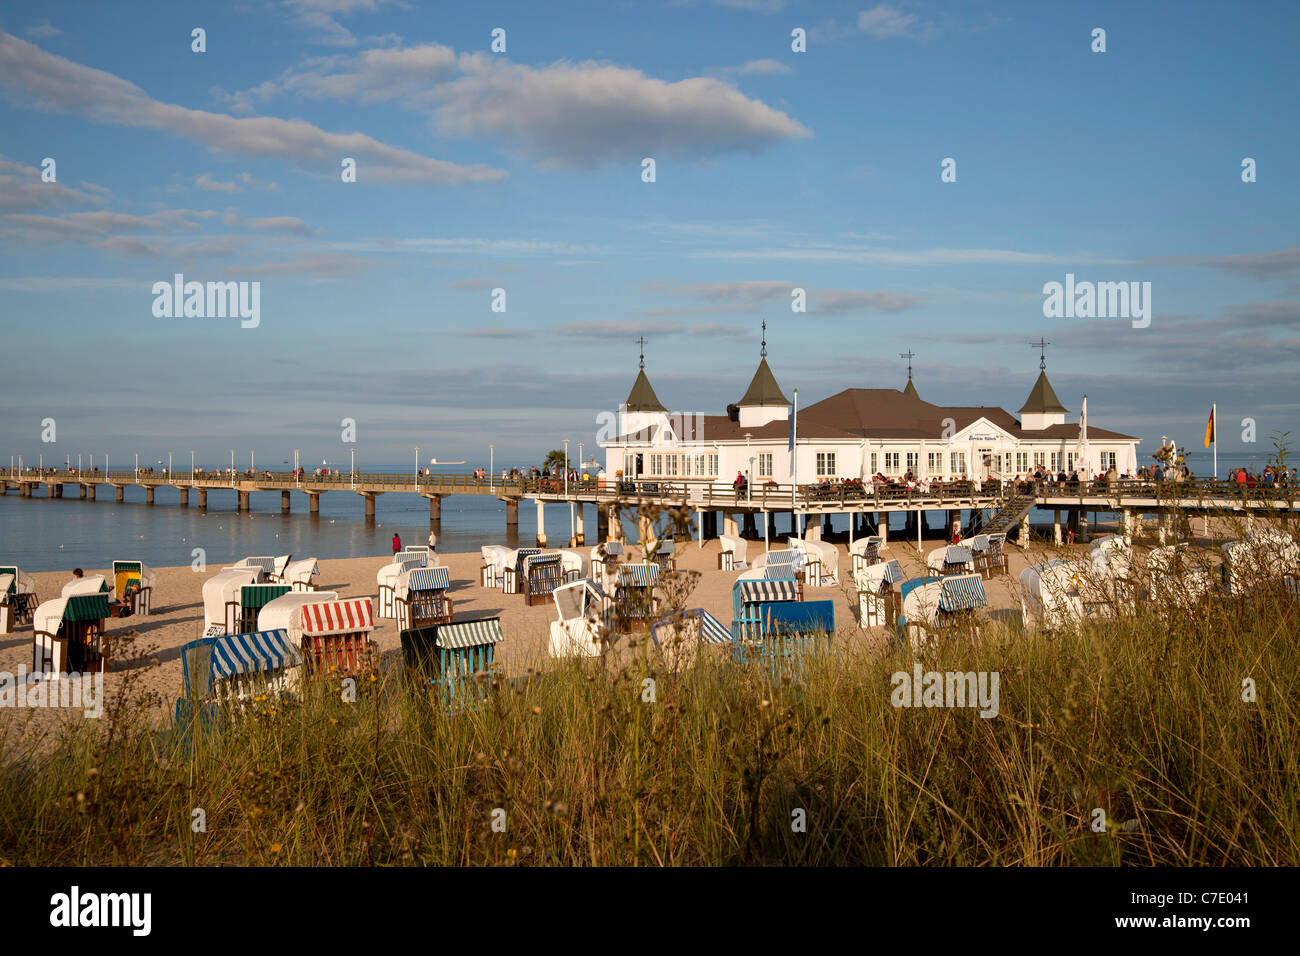 Beach chairs ' Strandkorb ' and the Seebruecke or Pier at the baltic beach of the seaside resort Ahlbeck, Usedom island, germany Stock Photo